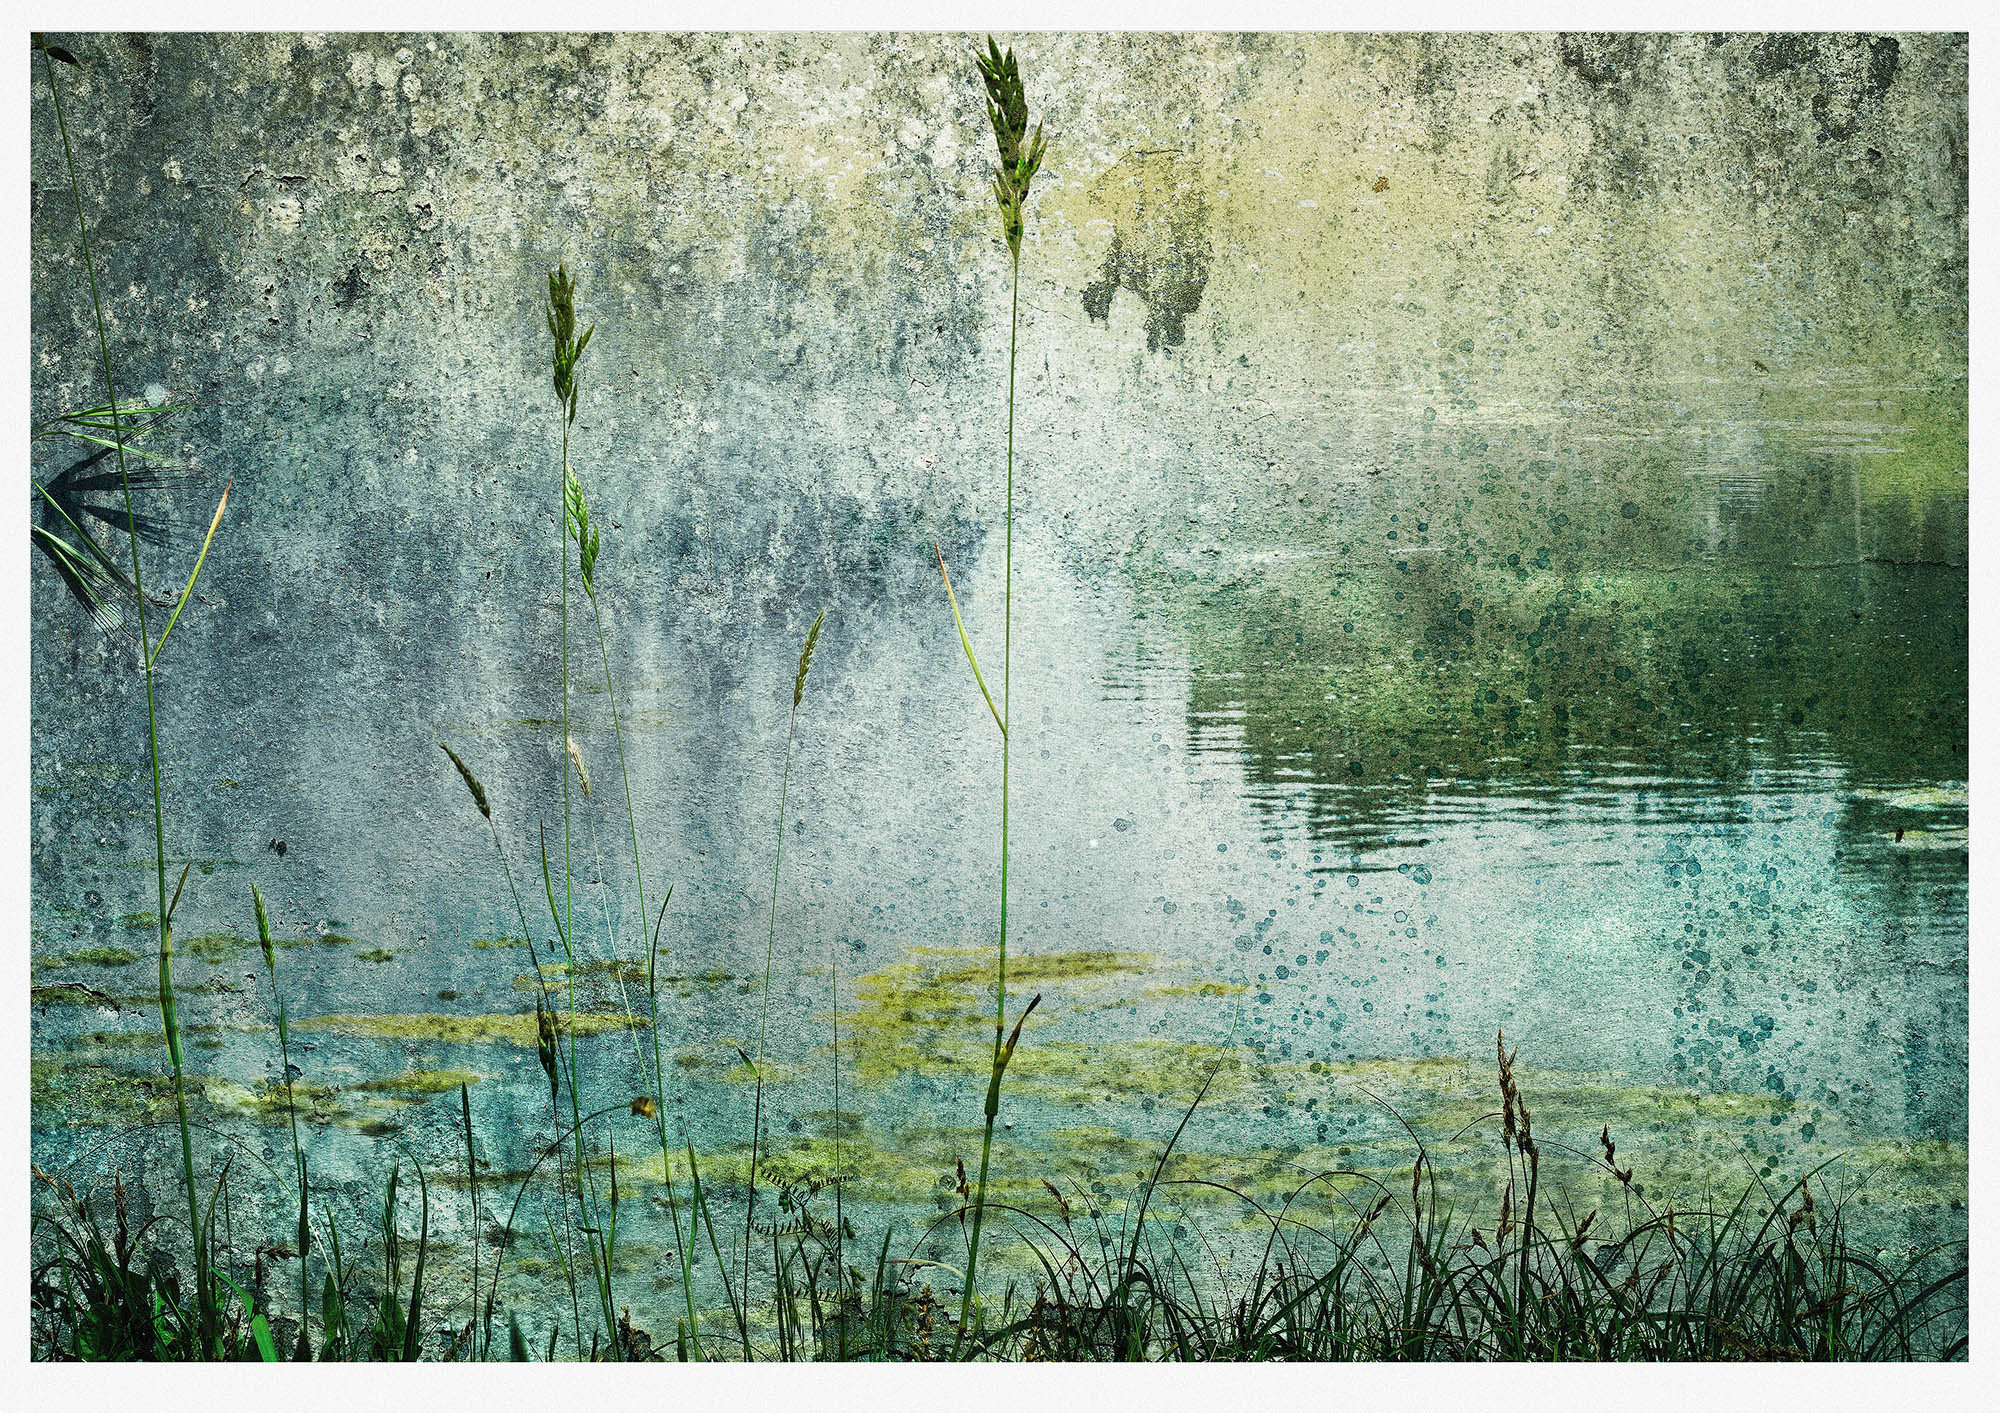 Calm monotoned misty pond landscape constructed from lichen stained wall and an actual pond photographs